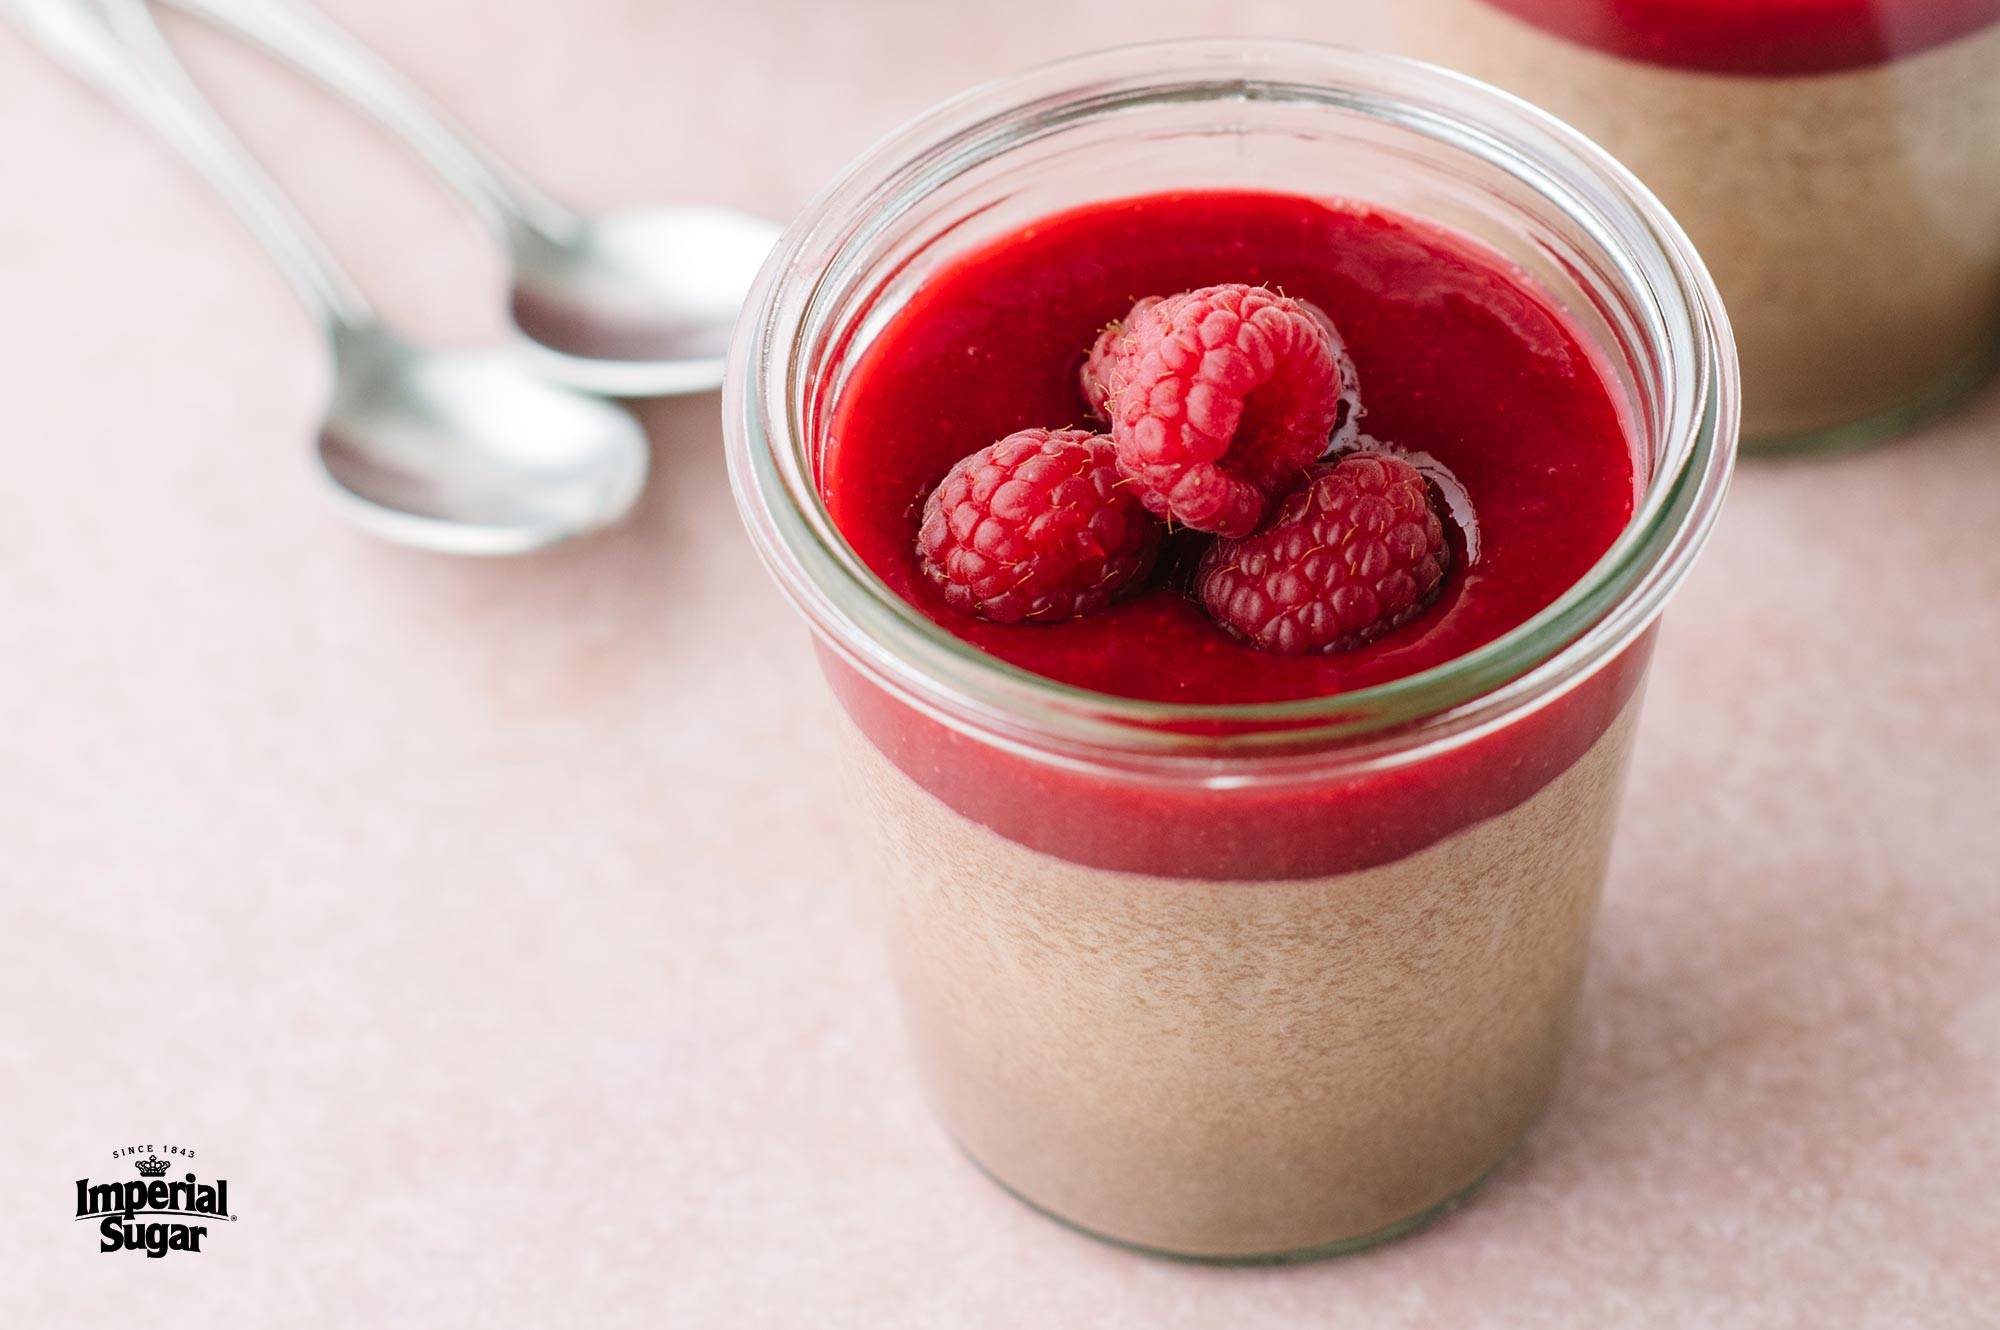 https://www.imperialsugar.com/sites/default/files/recipe/chocolate-mousse-with-raspberry-sauce-%28egg-free%29-imperial_0.jpg